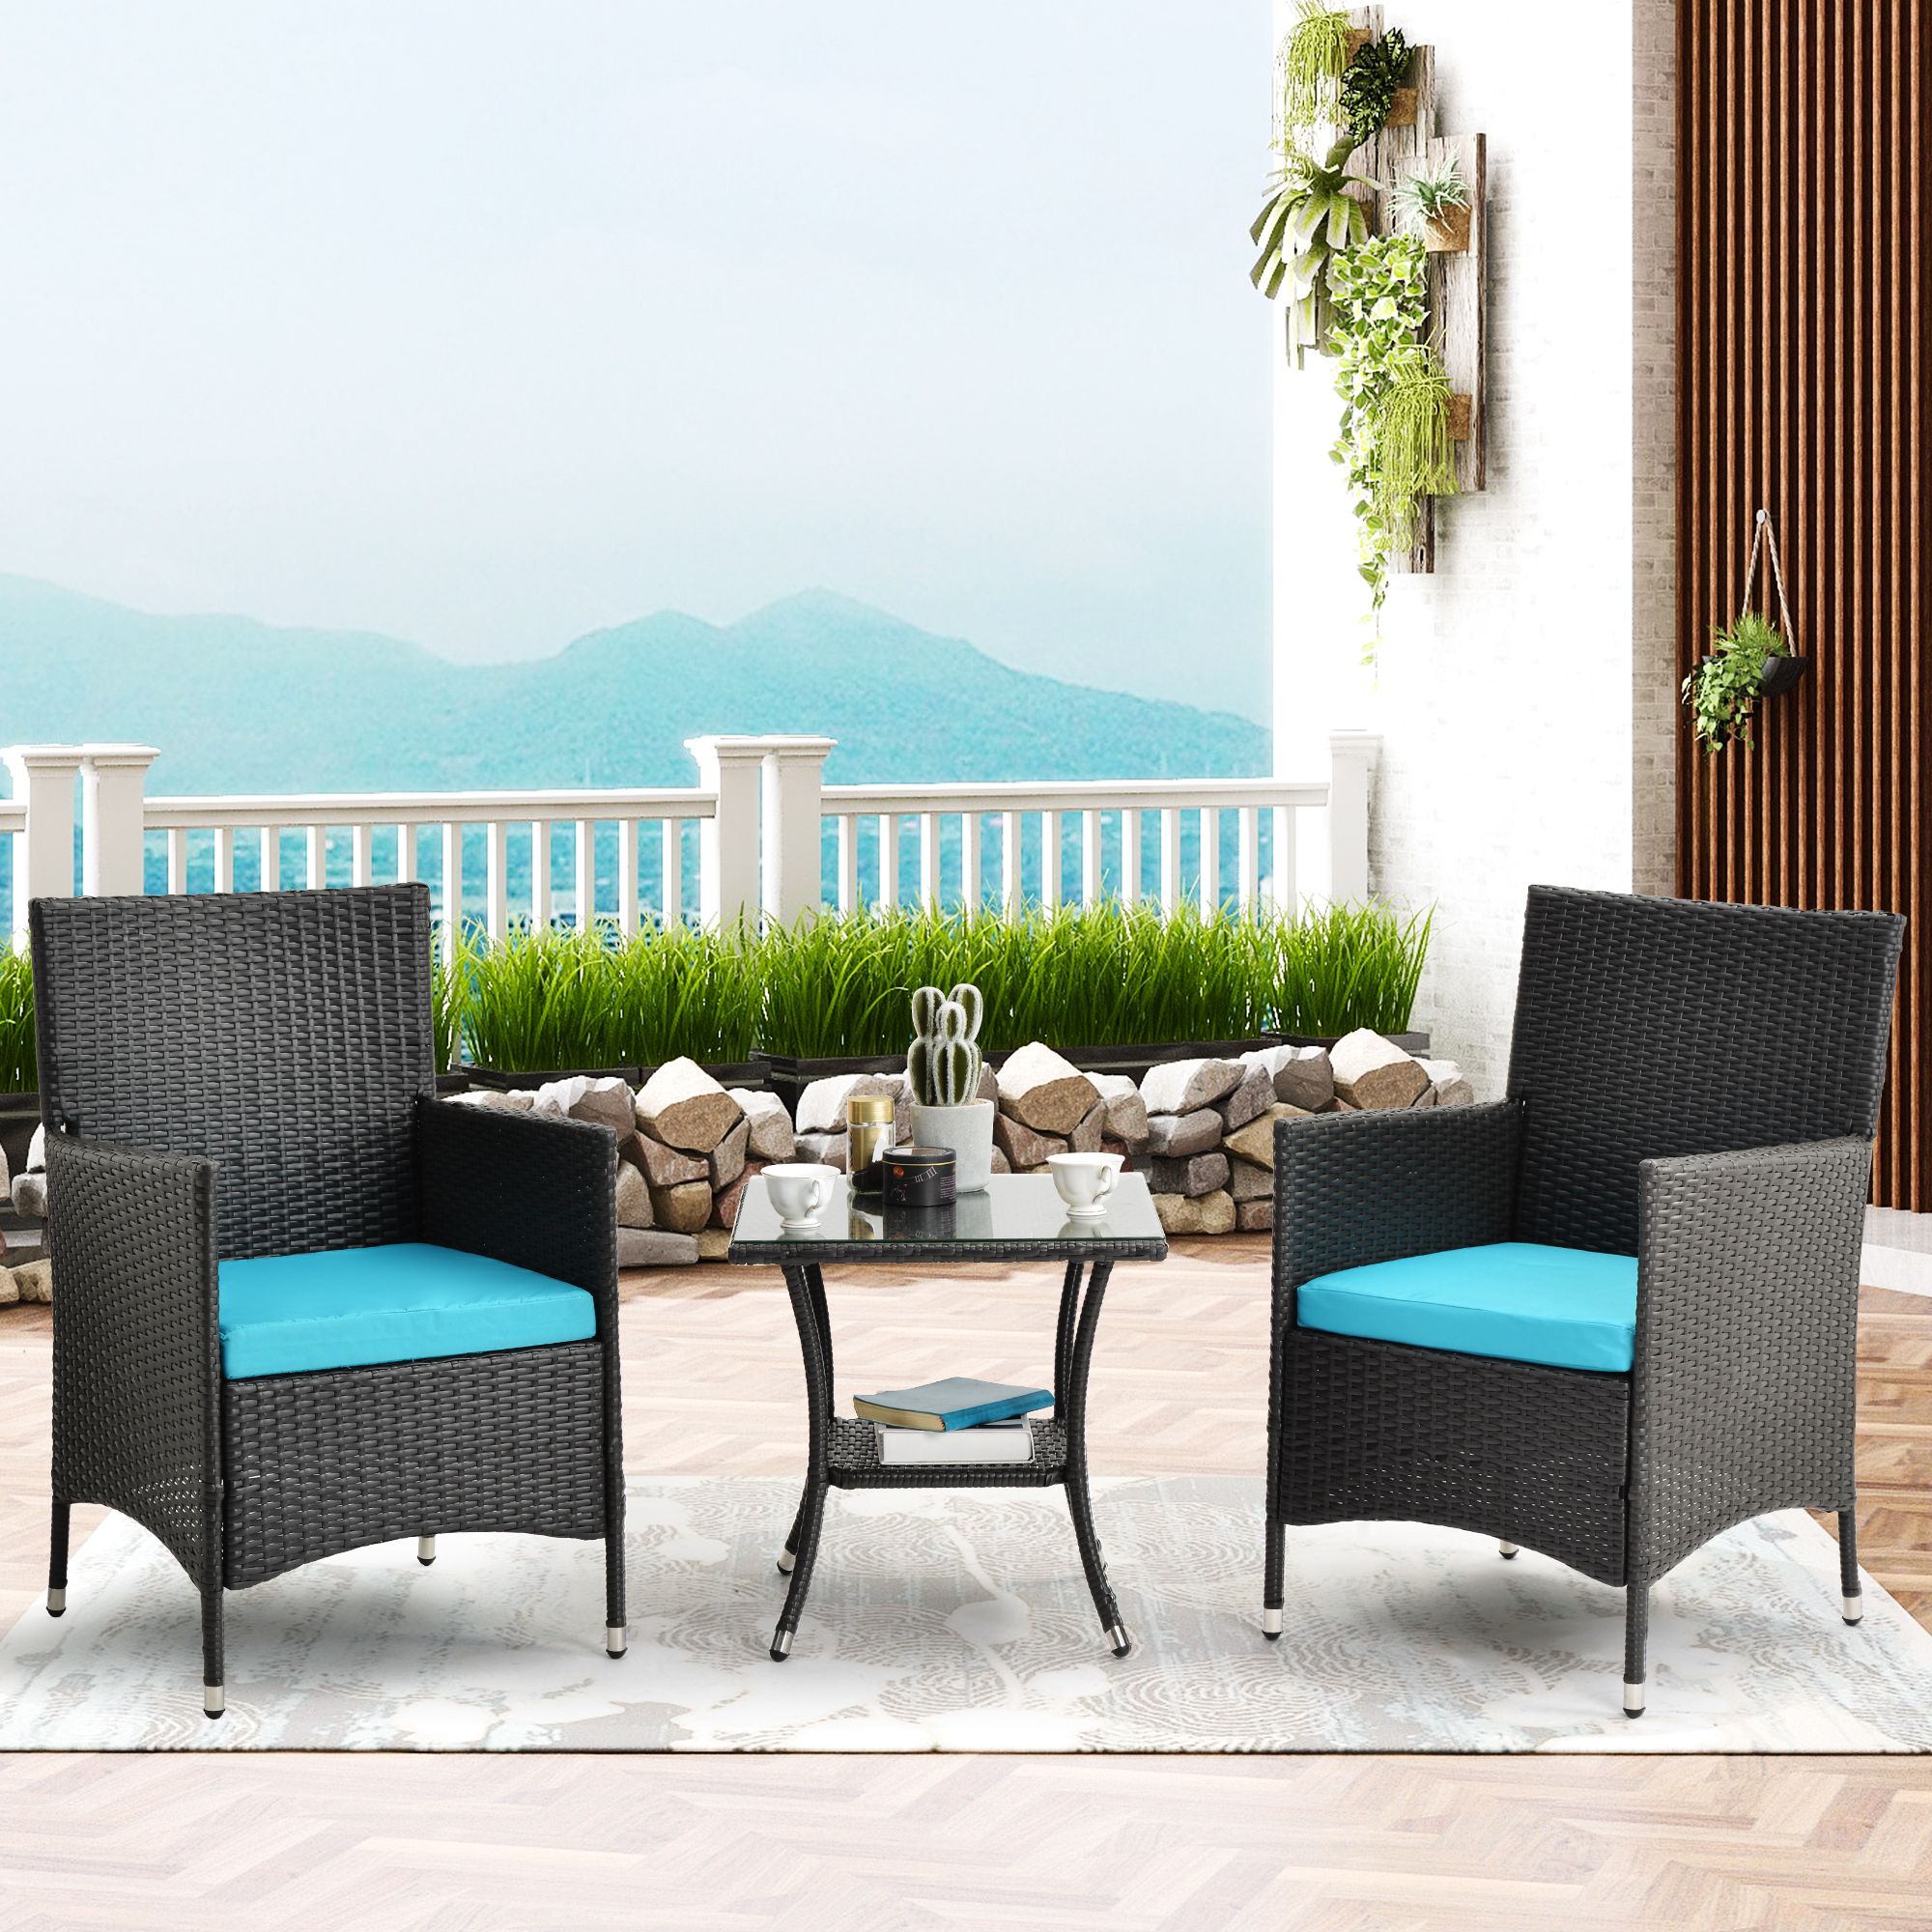 Outdoor Wicker Cafe Dining Sets For 2019 Outdoor Conversation Sets, 3 Piece Wicker Patio Set With Glass Dining (View 9 of 15)